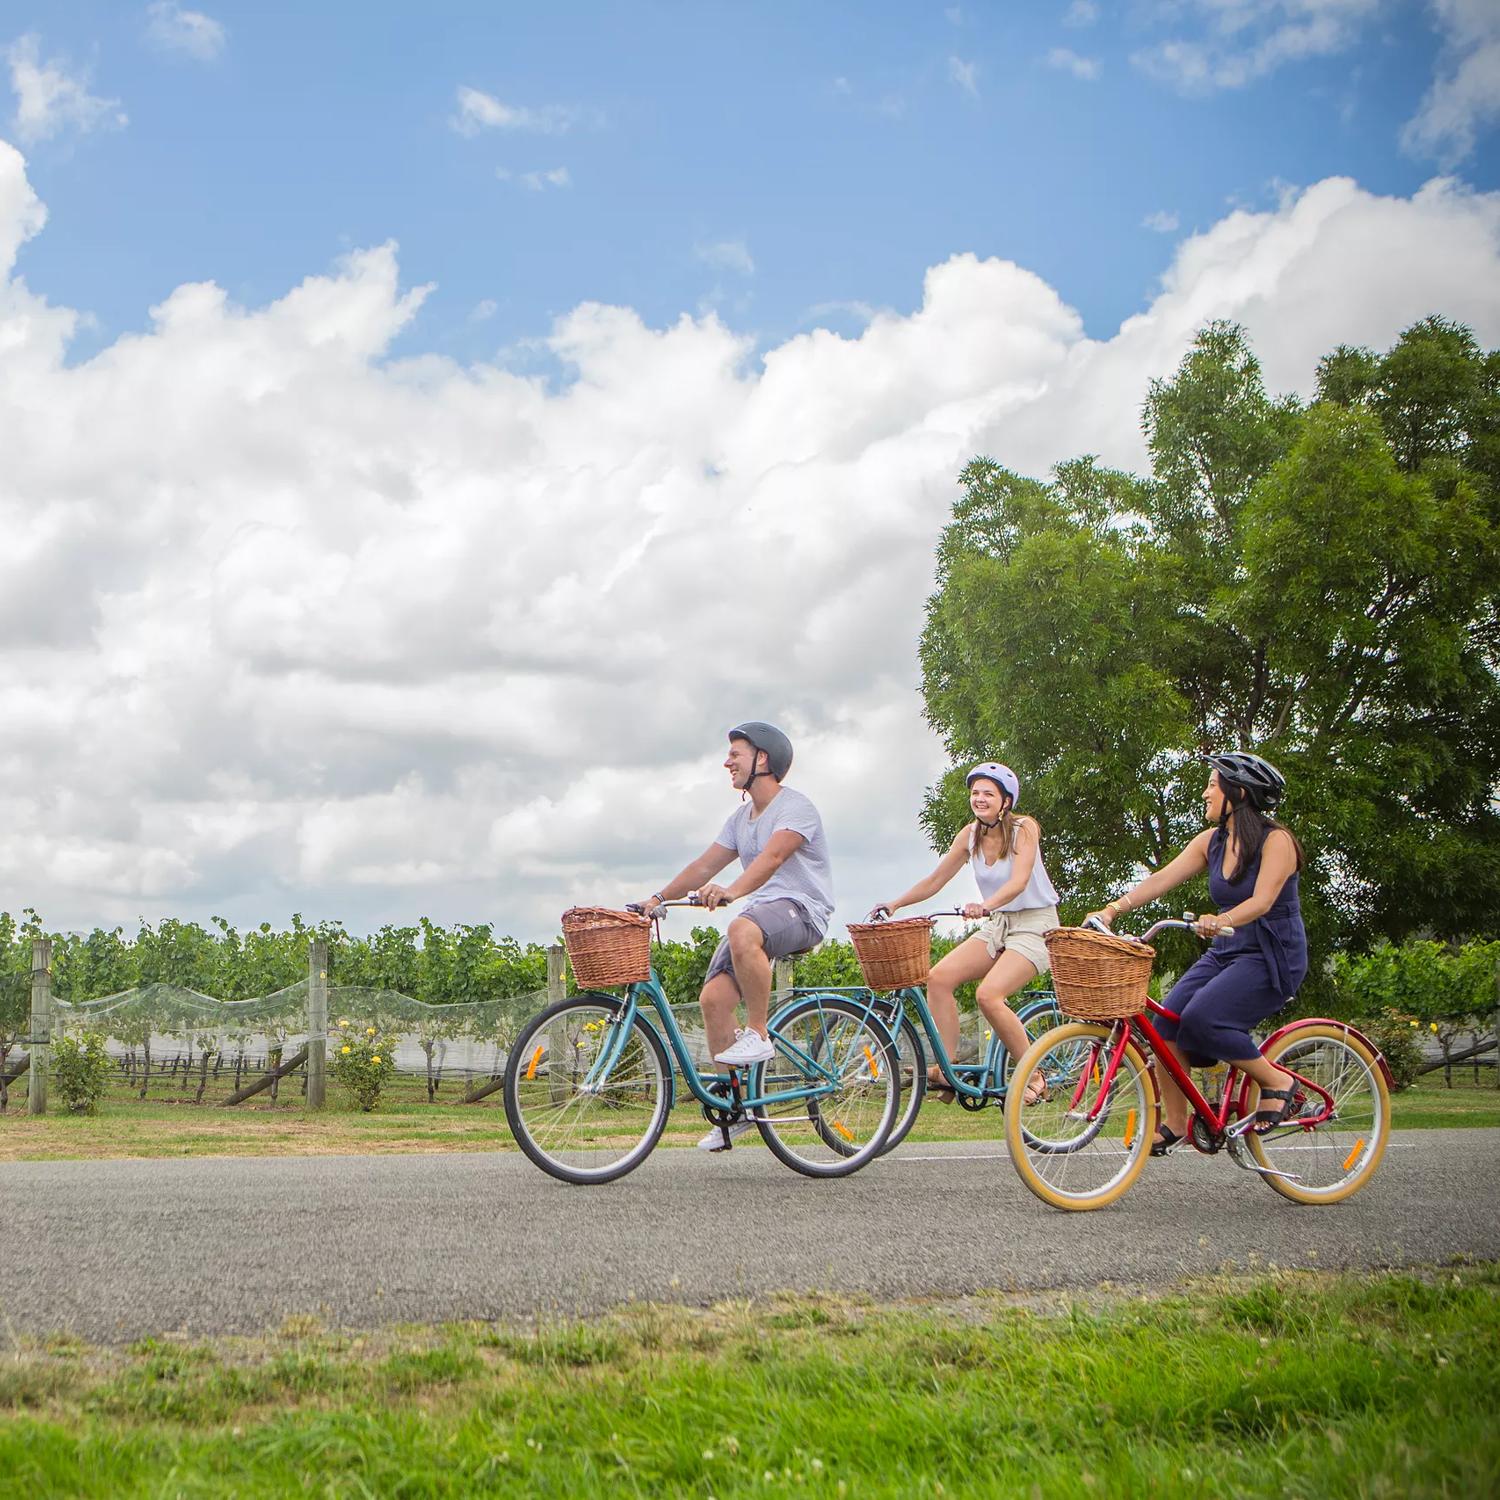 Three people cycle through a vineyard on a sunny day.